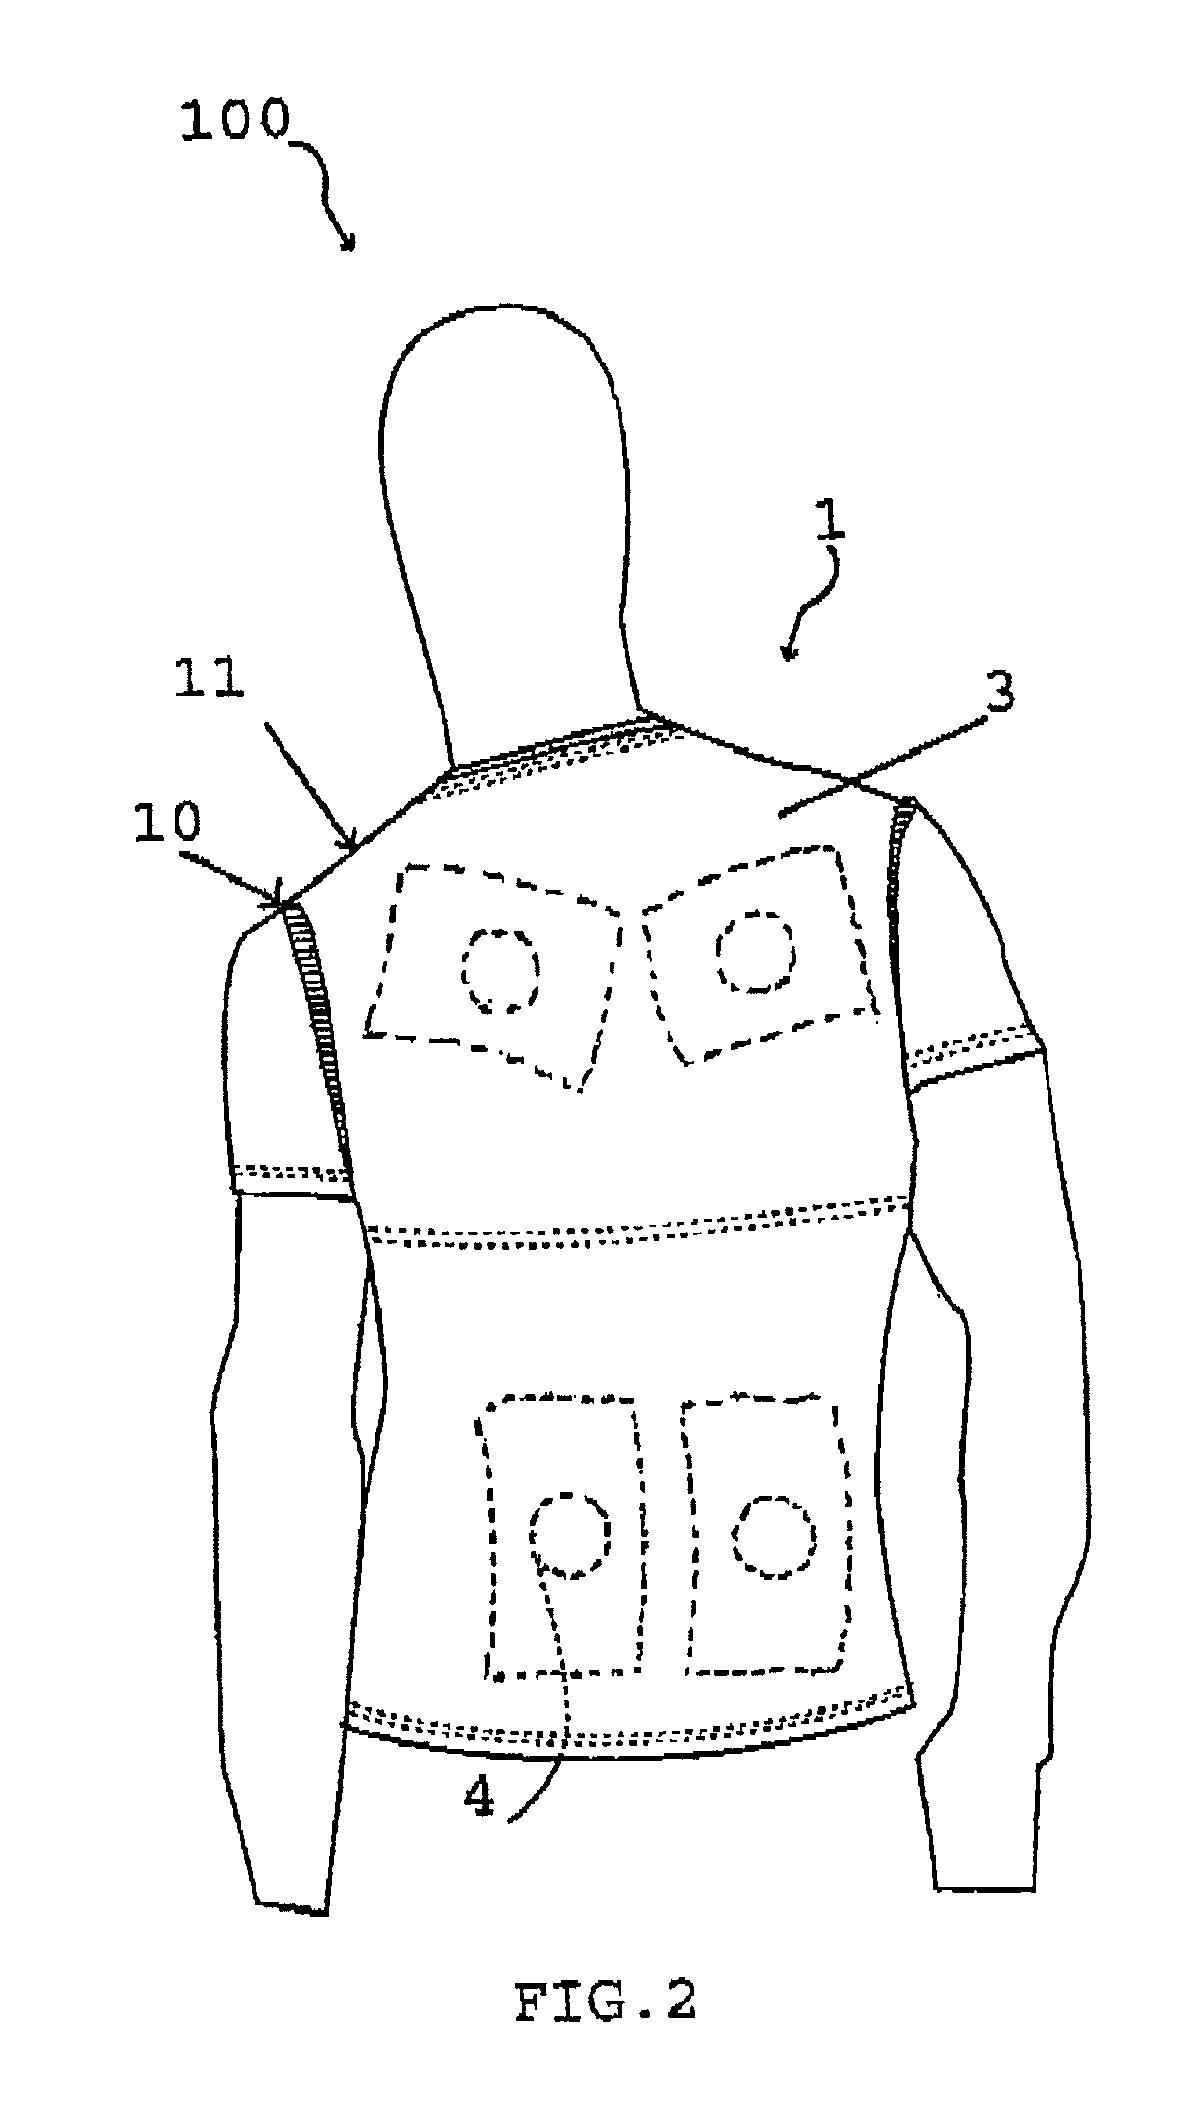 Temperature Altering Garment and Methods of Use Thereon